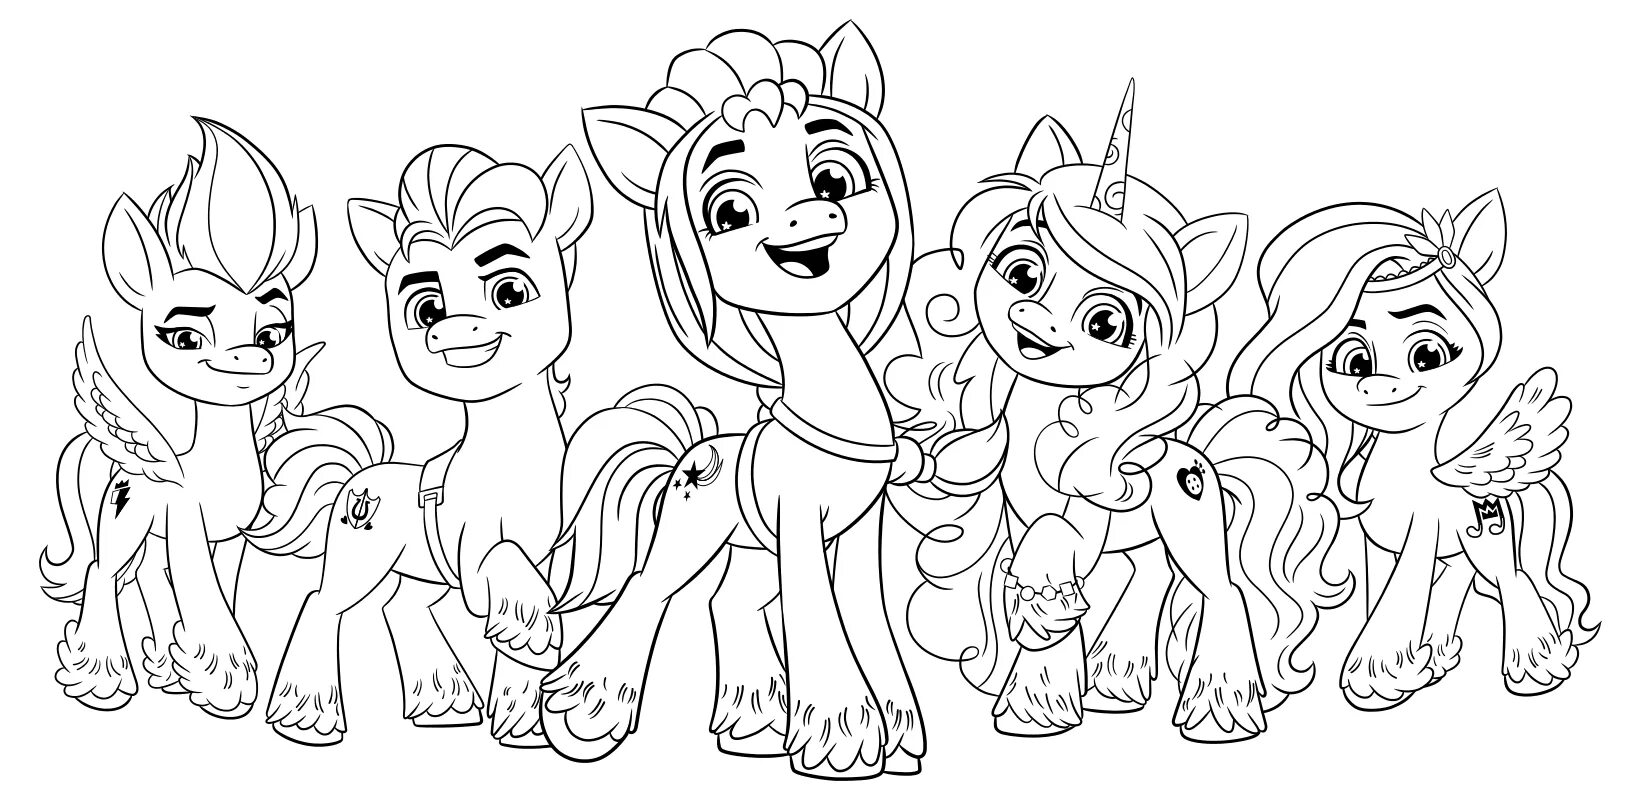 Coloring page dazzling pony